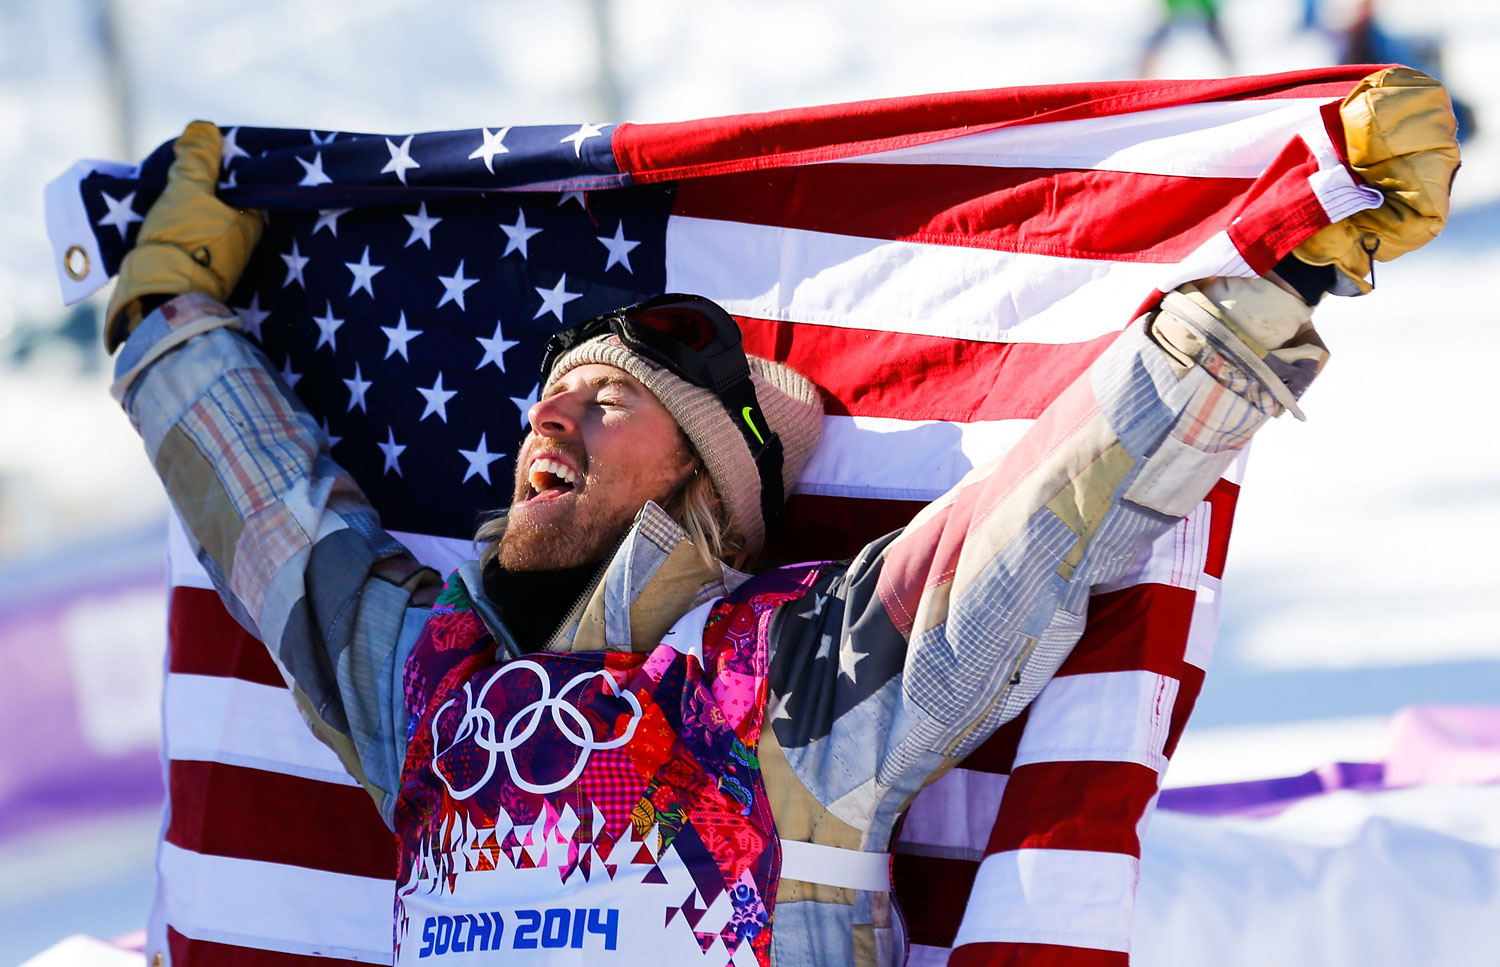 Winner Sage Kotsenburg of the U.S. celebrates after the men's snowboard slopestyle final competition at the 2014 Sochi Olympic Games in Rosa Khutor, Feb. 8, 2014. (Mike Blake / Reuters)